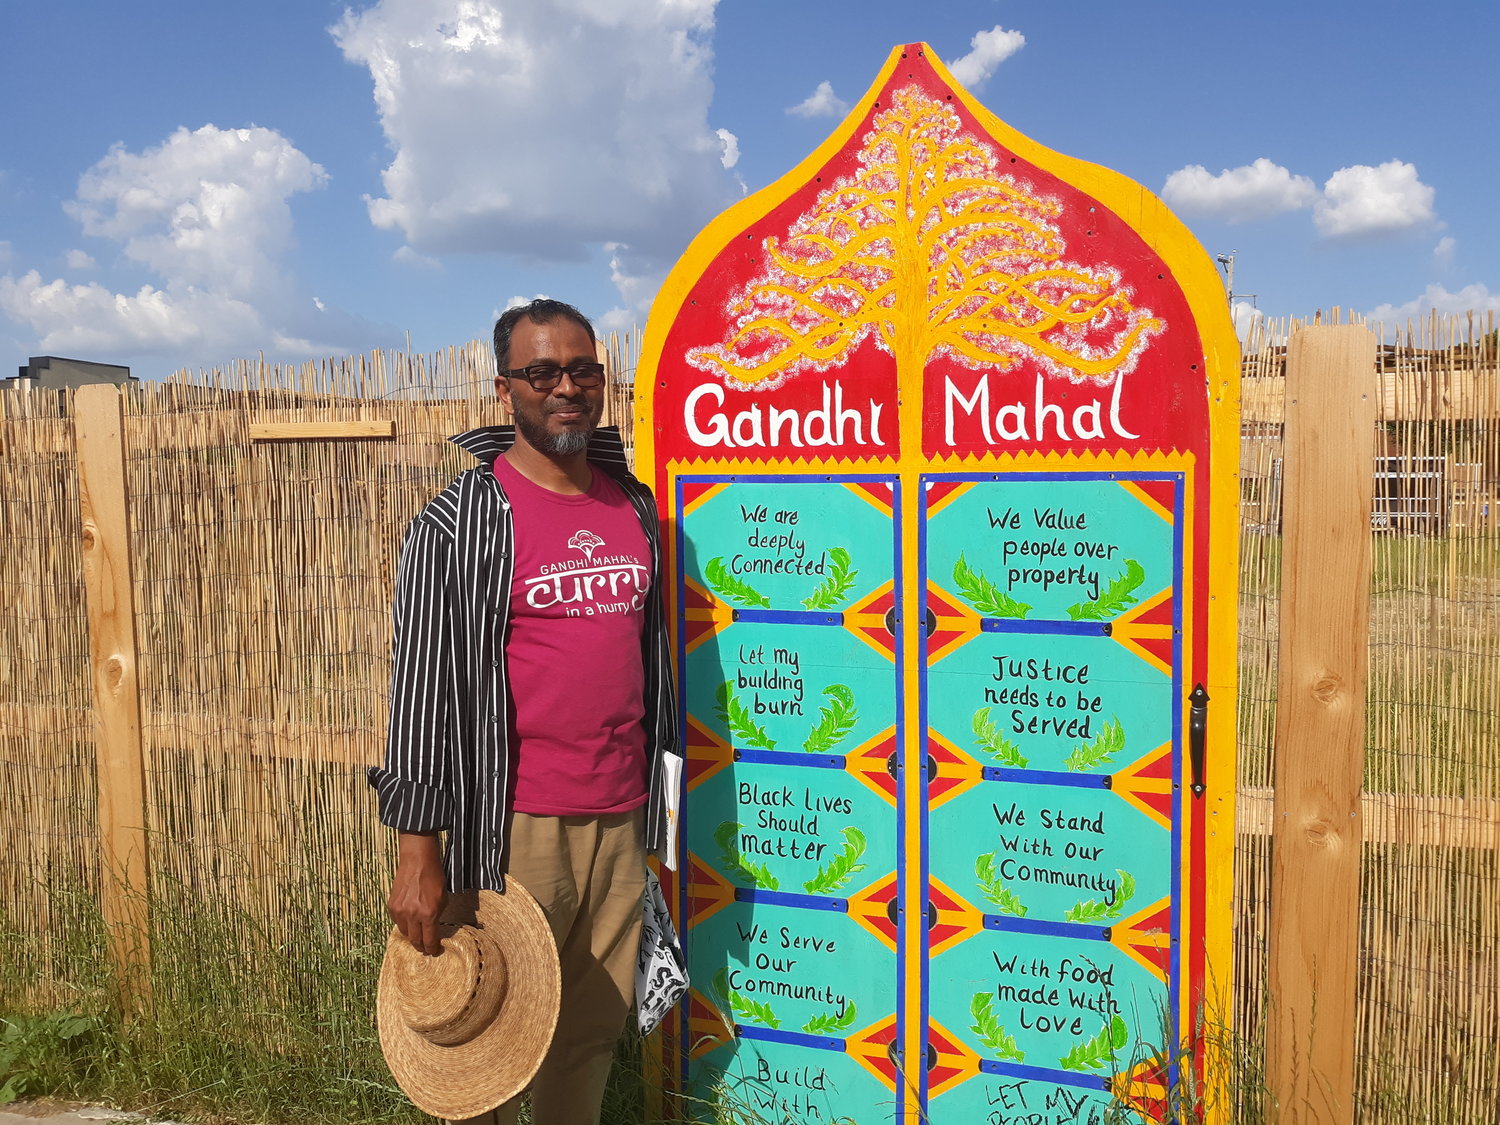 Gandhi Mahal owner Ruhel Islam stands by a gate at 3009 27th Ave. on which statements that drive them are written, including "We are deeply connected. We value people over property. Justice needs to be served. We stand with our community." He plans to rebuild at the site of the former building, but said it will take several years to make it happen. (Photo by  Jan Willms)